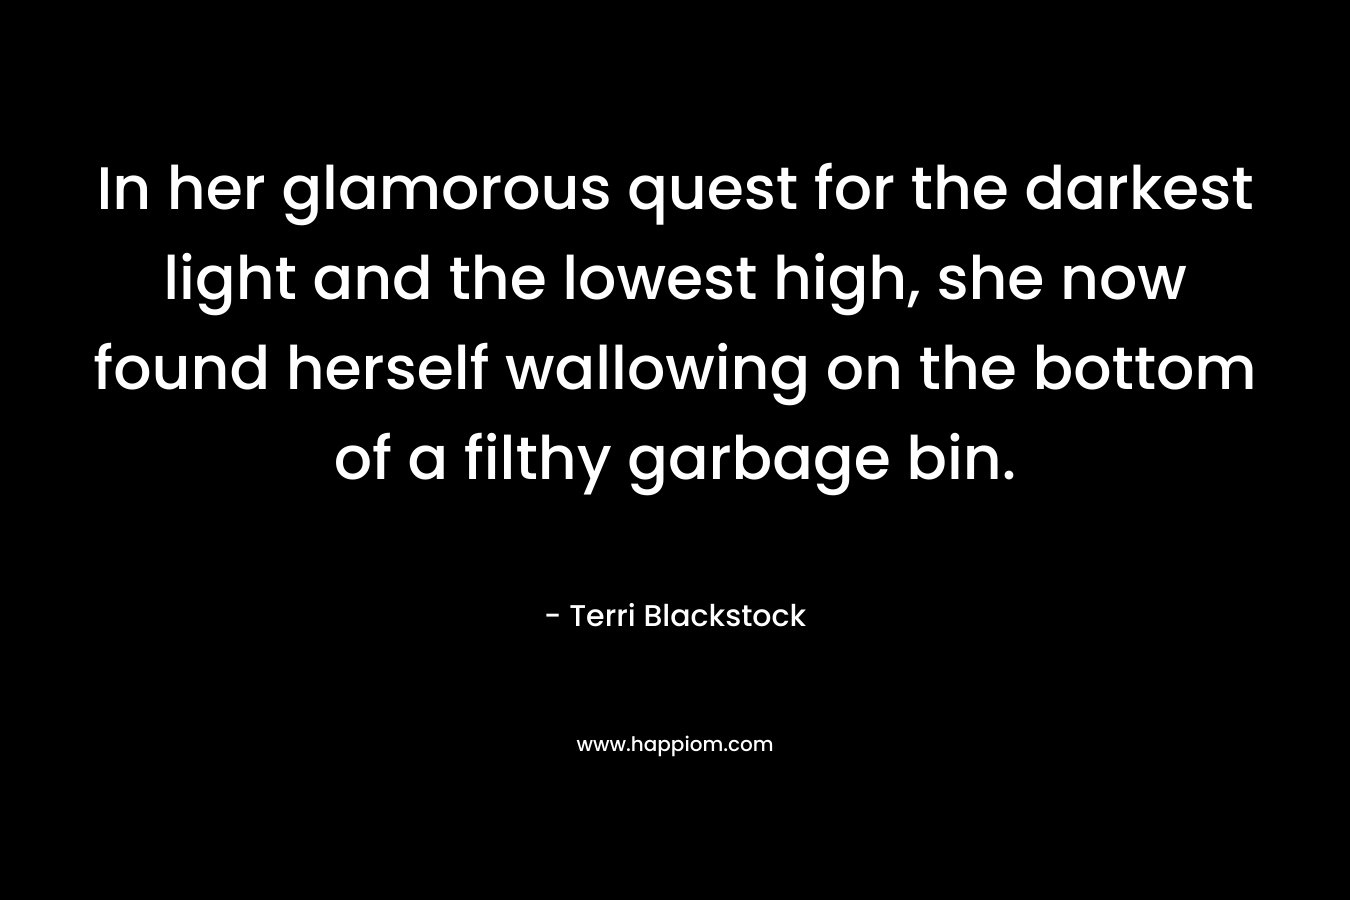 In her glamorous quest for the darkest light and the lowest high, she now found herself wallowing on the bottom of a filthy garbage bin. – Terri Blackstock